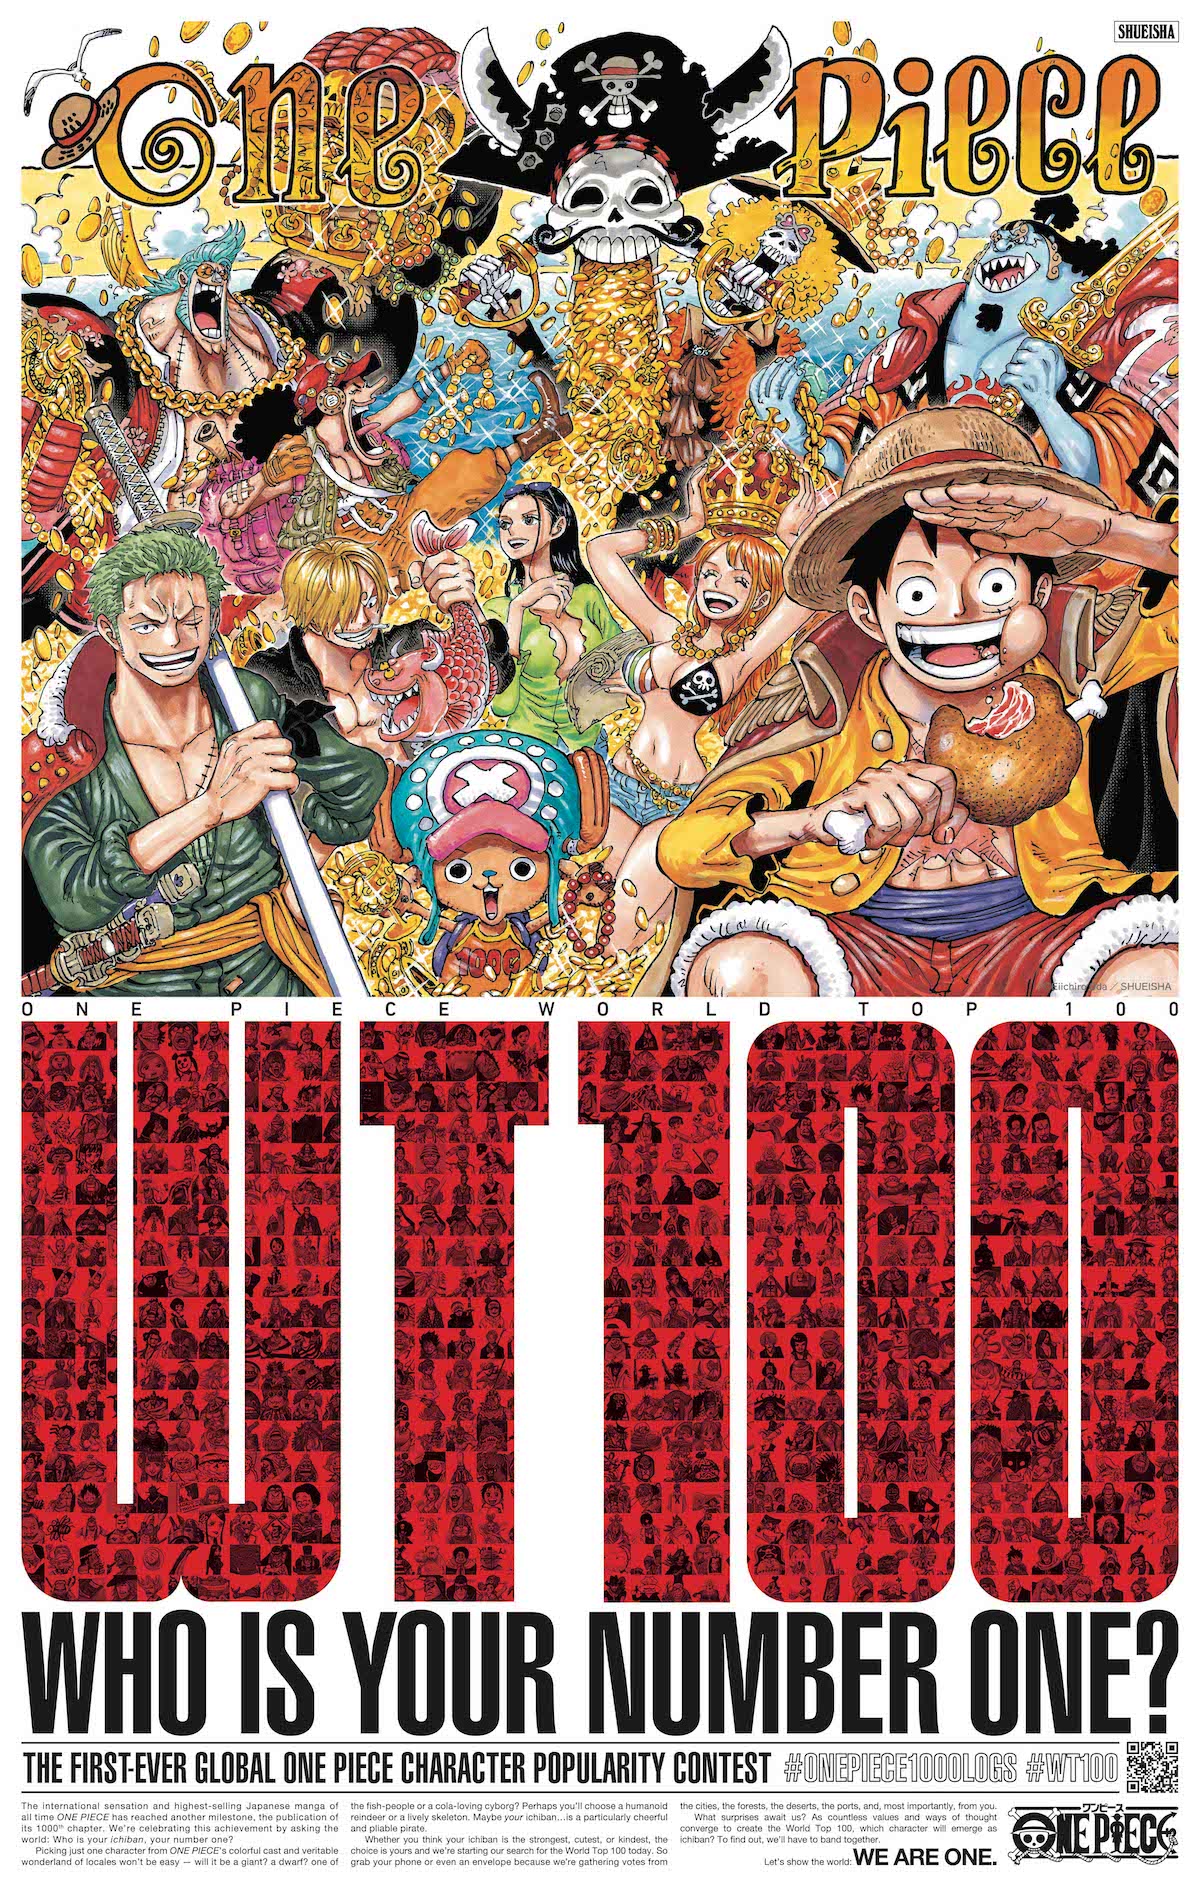 One Piece Episode 1000 Officially Set For November 21, Special